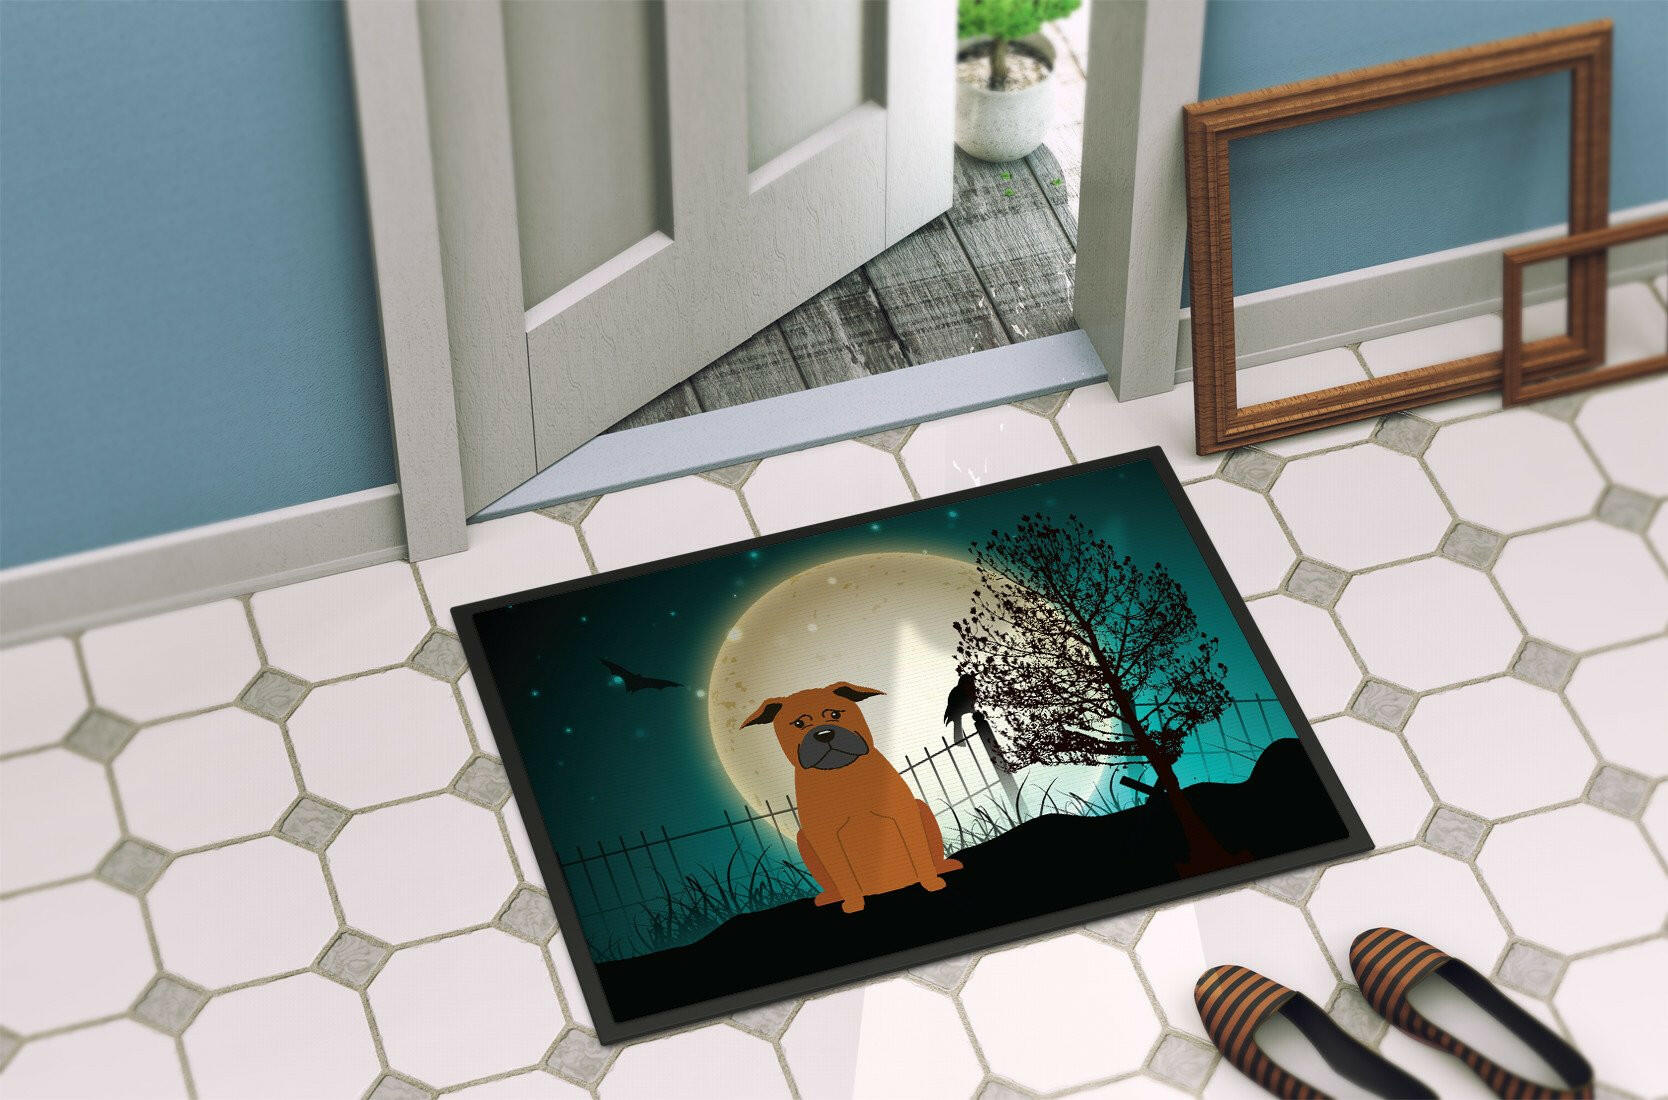 Halloween Scary Chinese Chongqing Dog Indoor or Outdoor Mat 24x36 BB2301JMAT - the-store.com